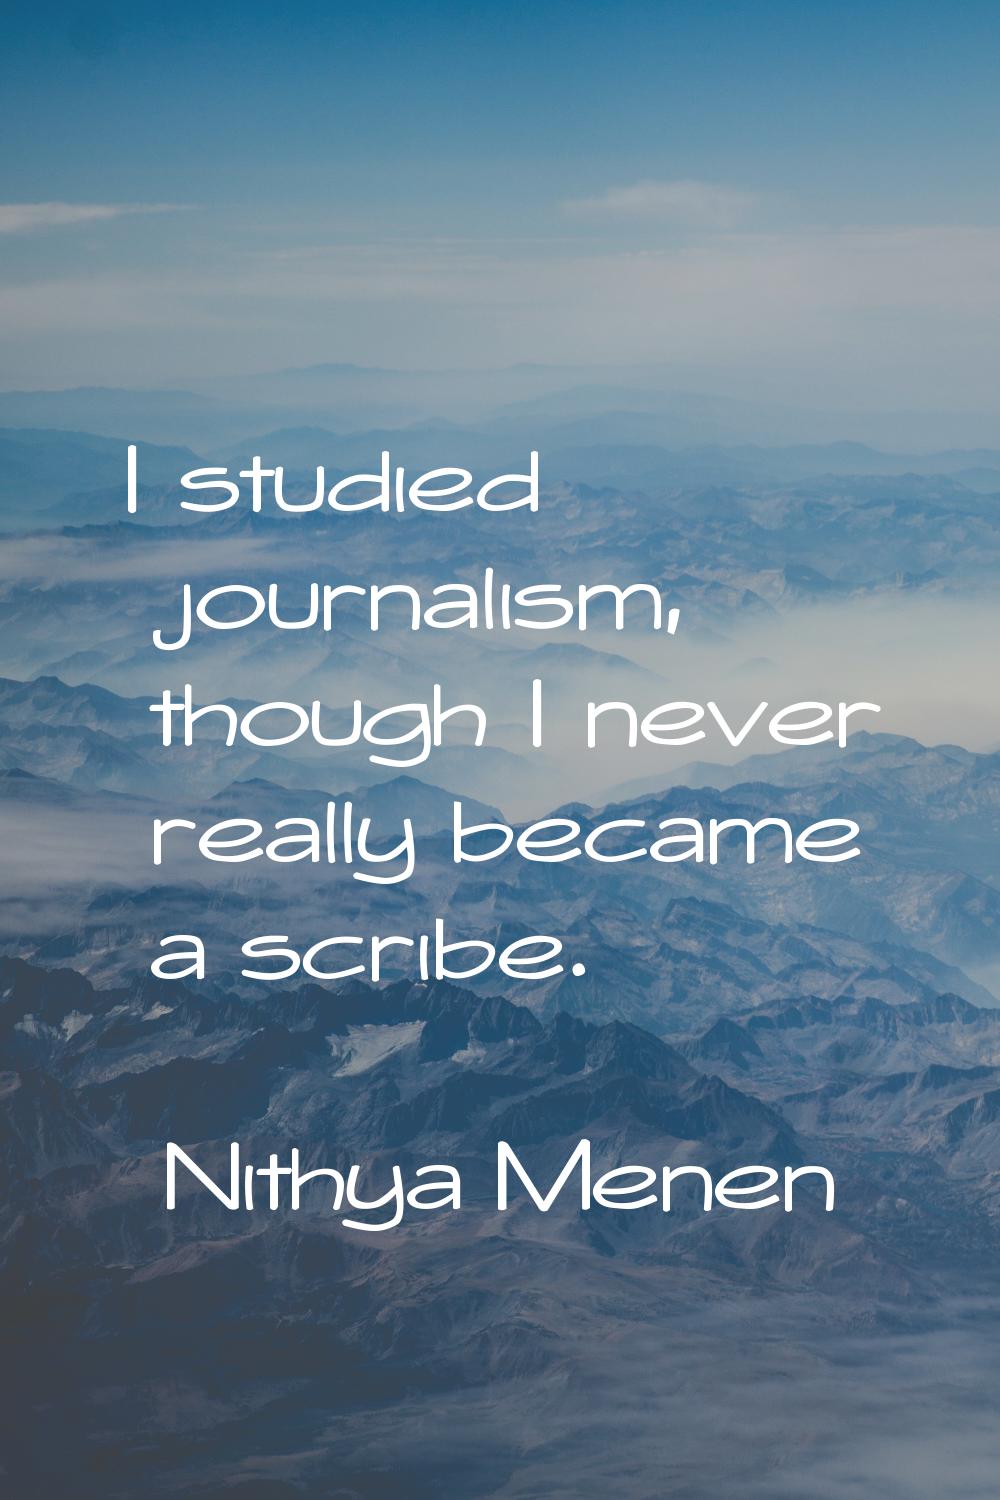 I studied journalism, though I never really became a scribe.